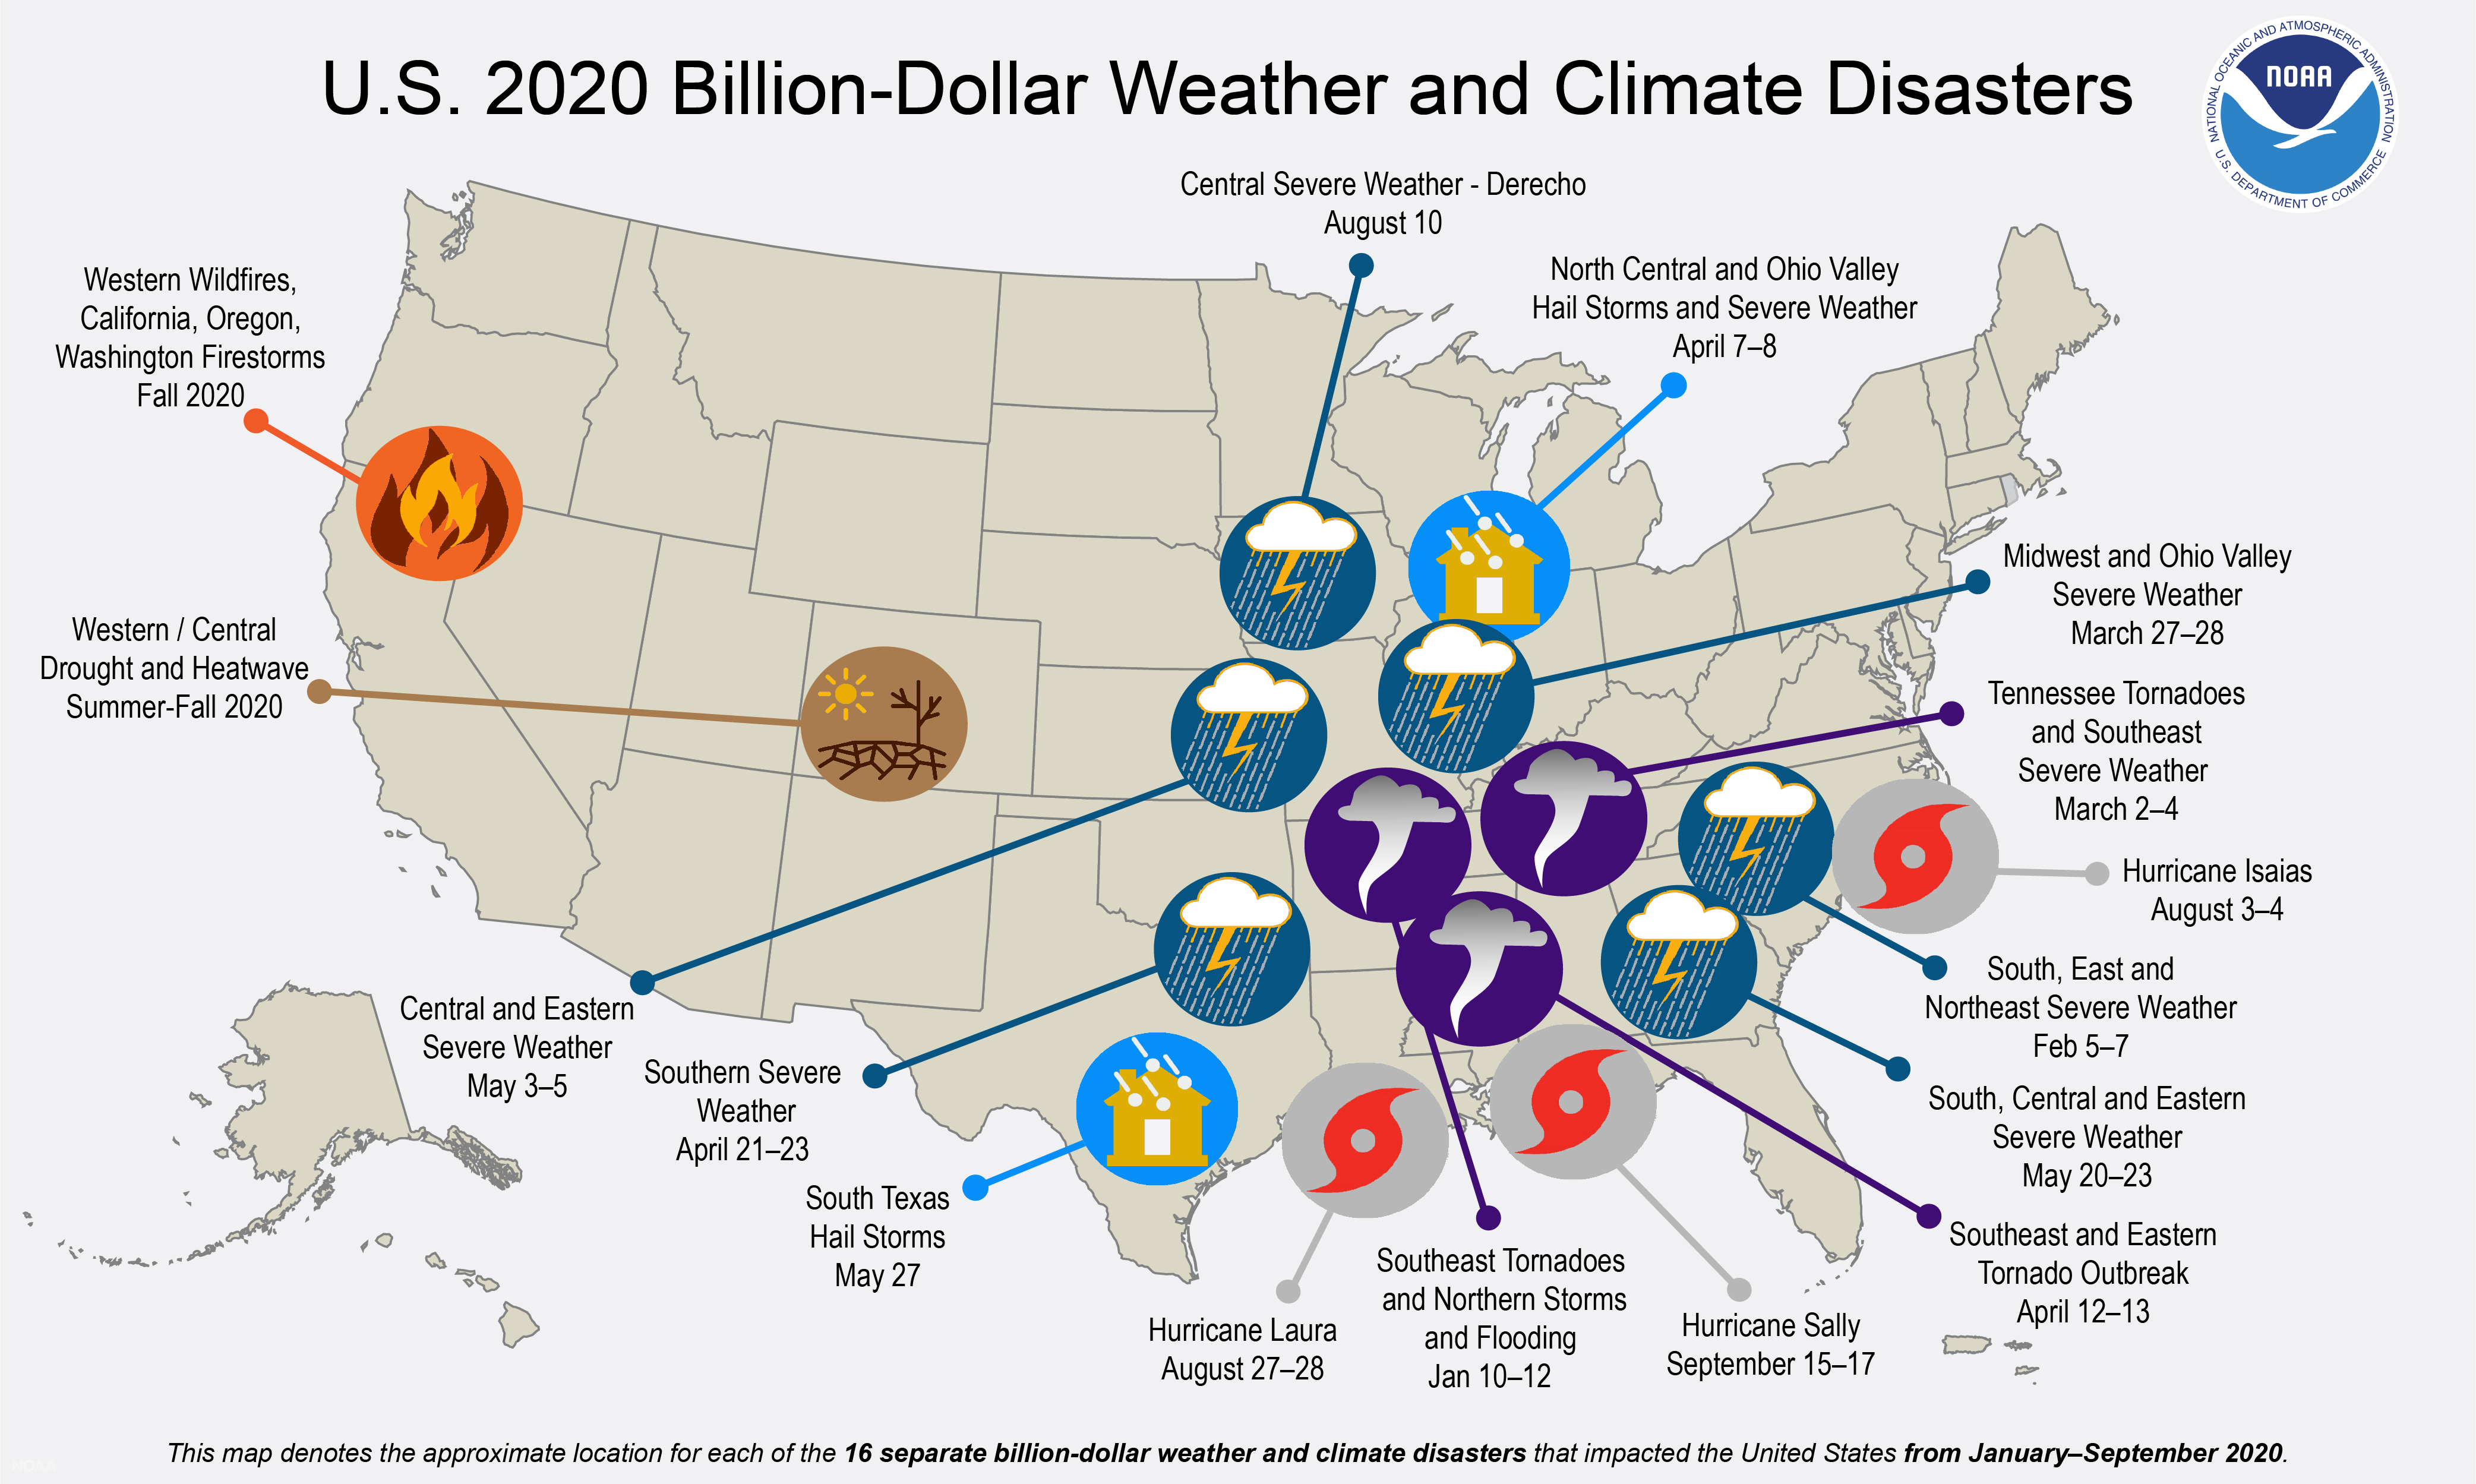 The billion-dollar weather and climate events to impact the US in 2020